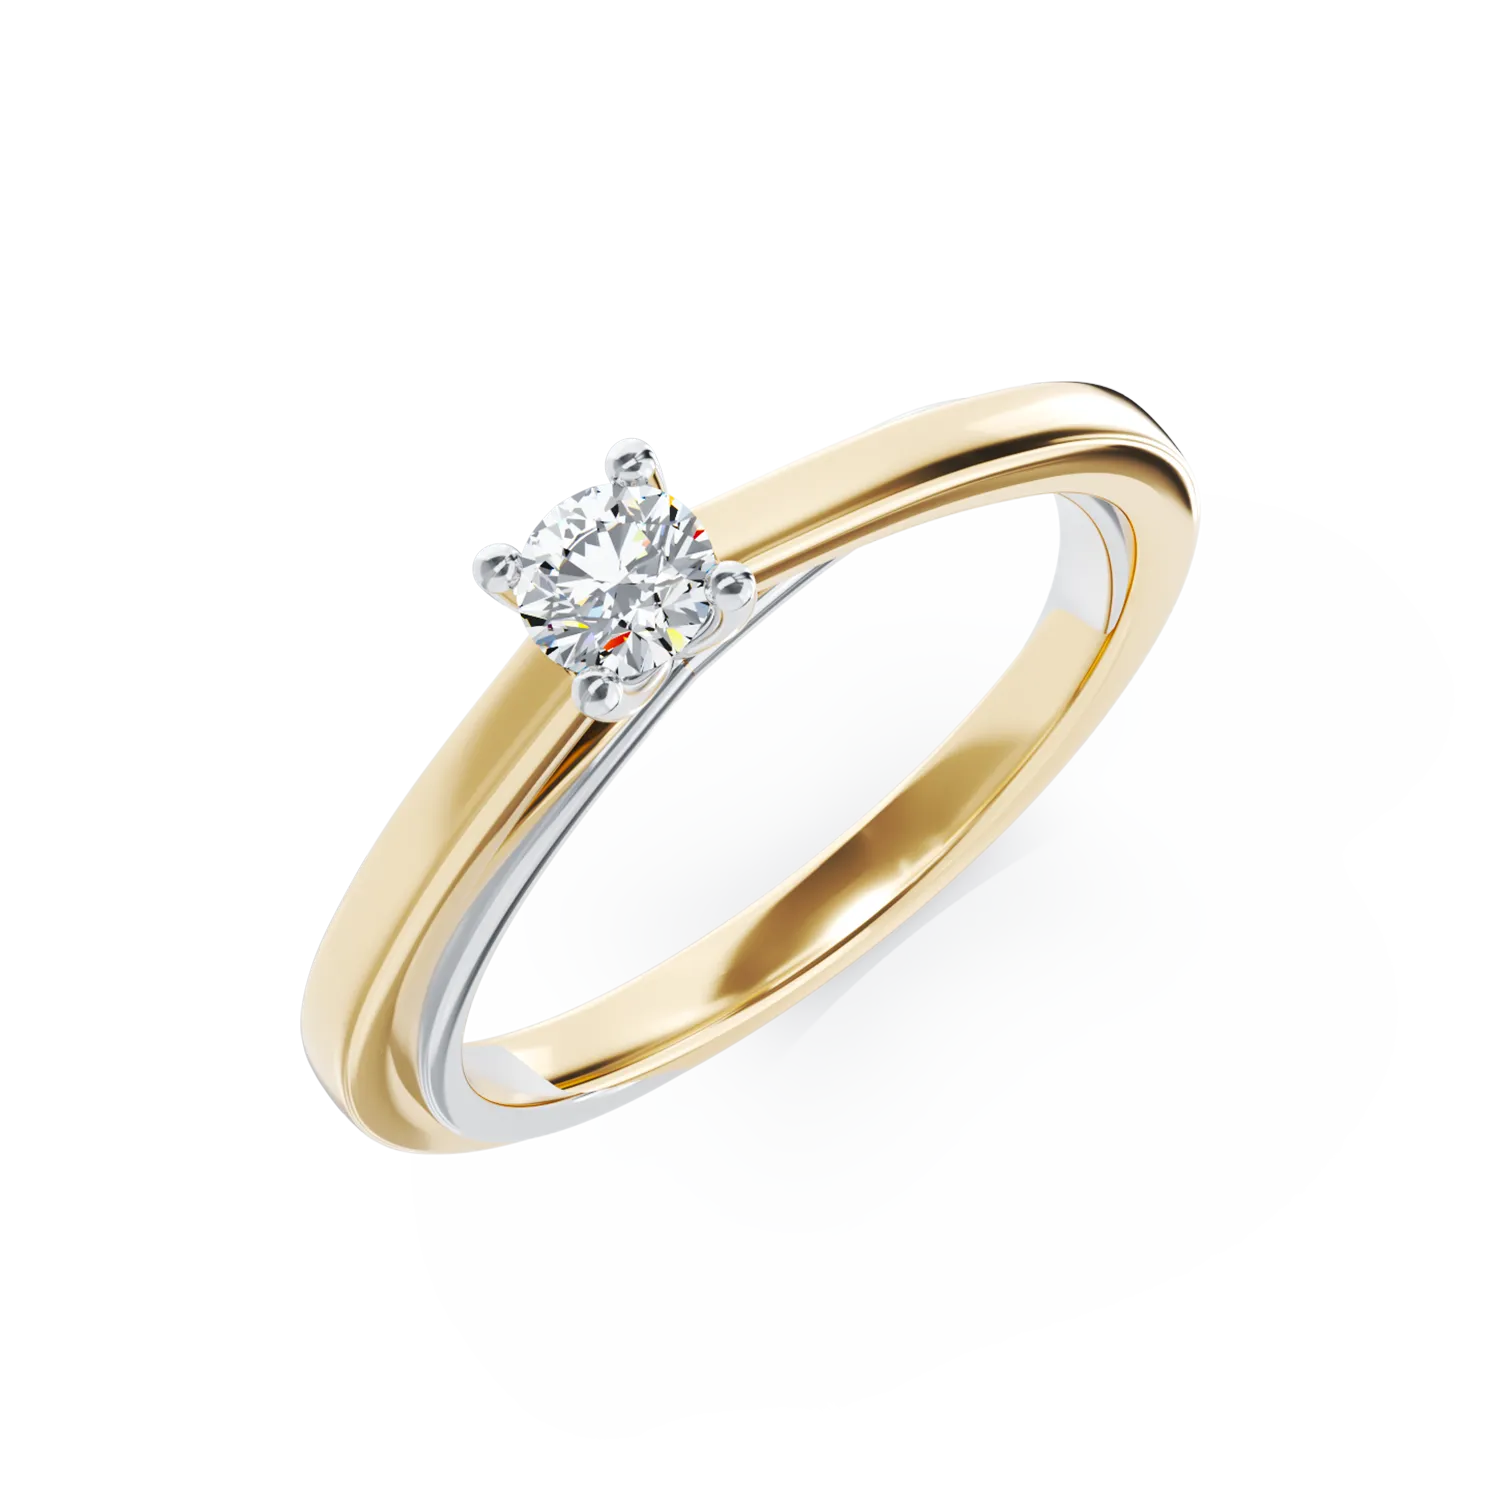 White-yellow gold engagement ring with a 0.2ct solitaire diamond